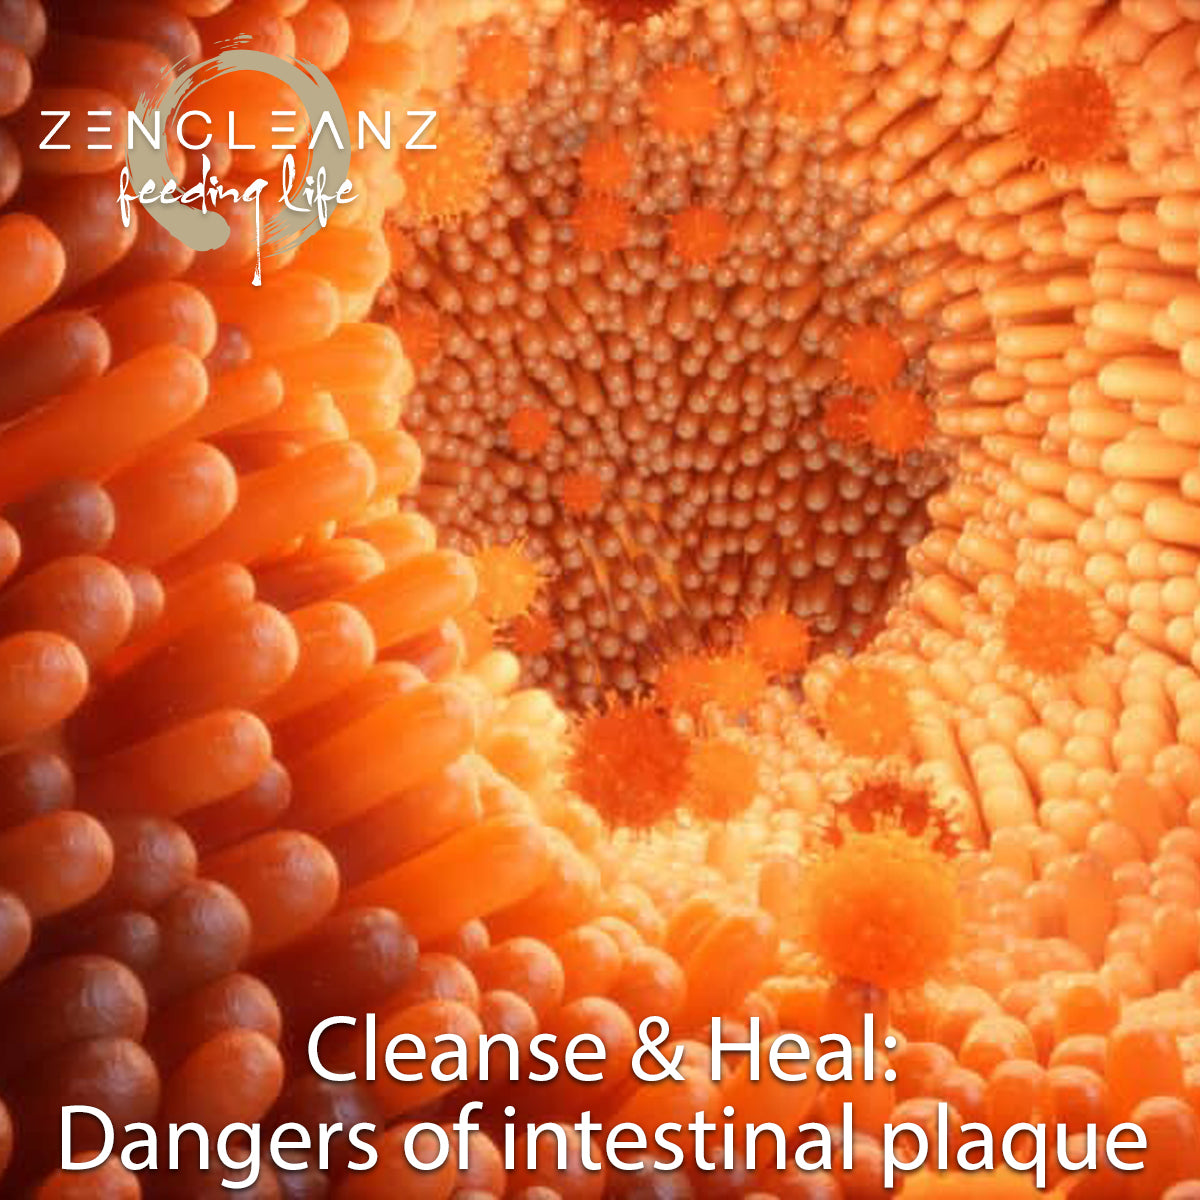 The dangers of intestinal plaque